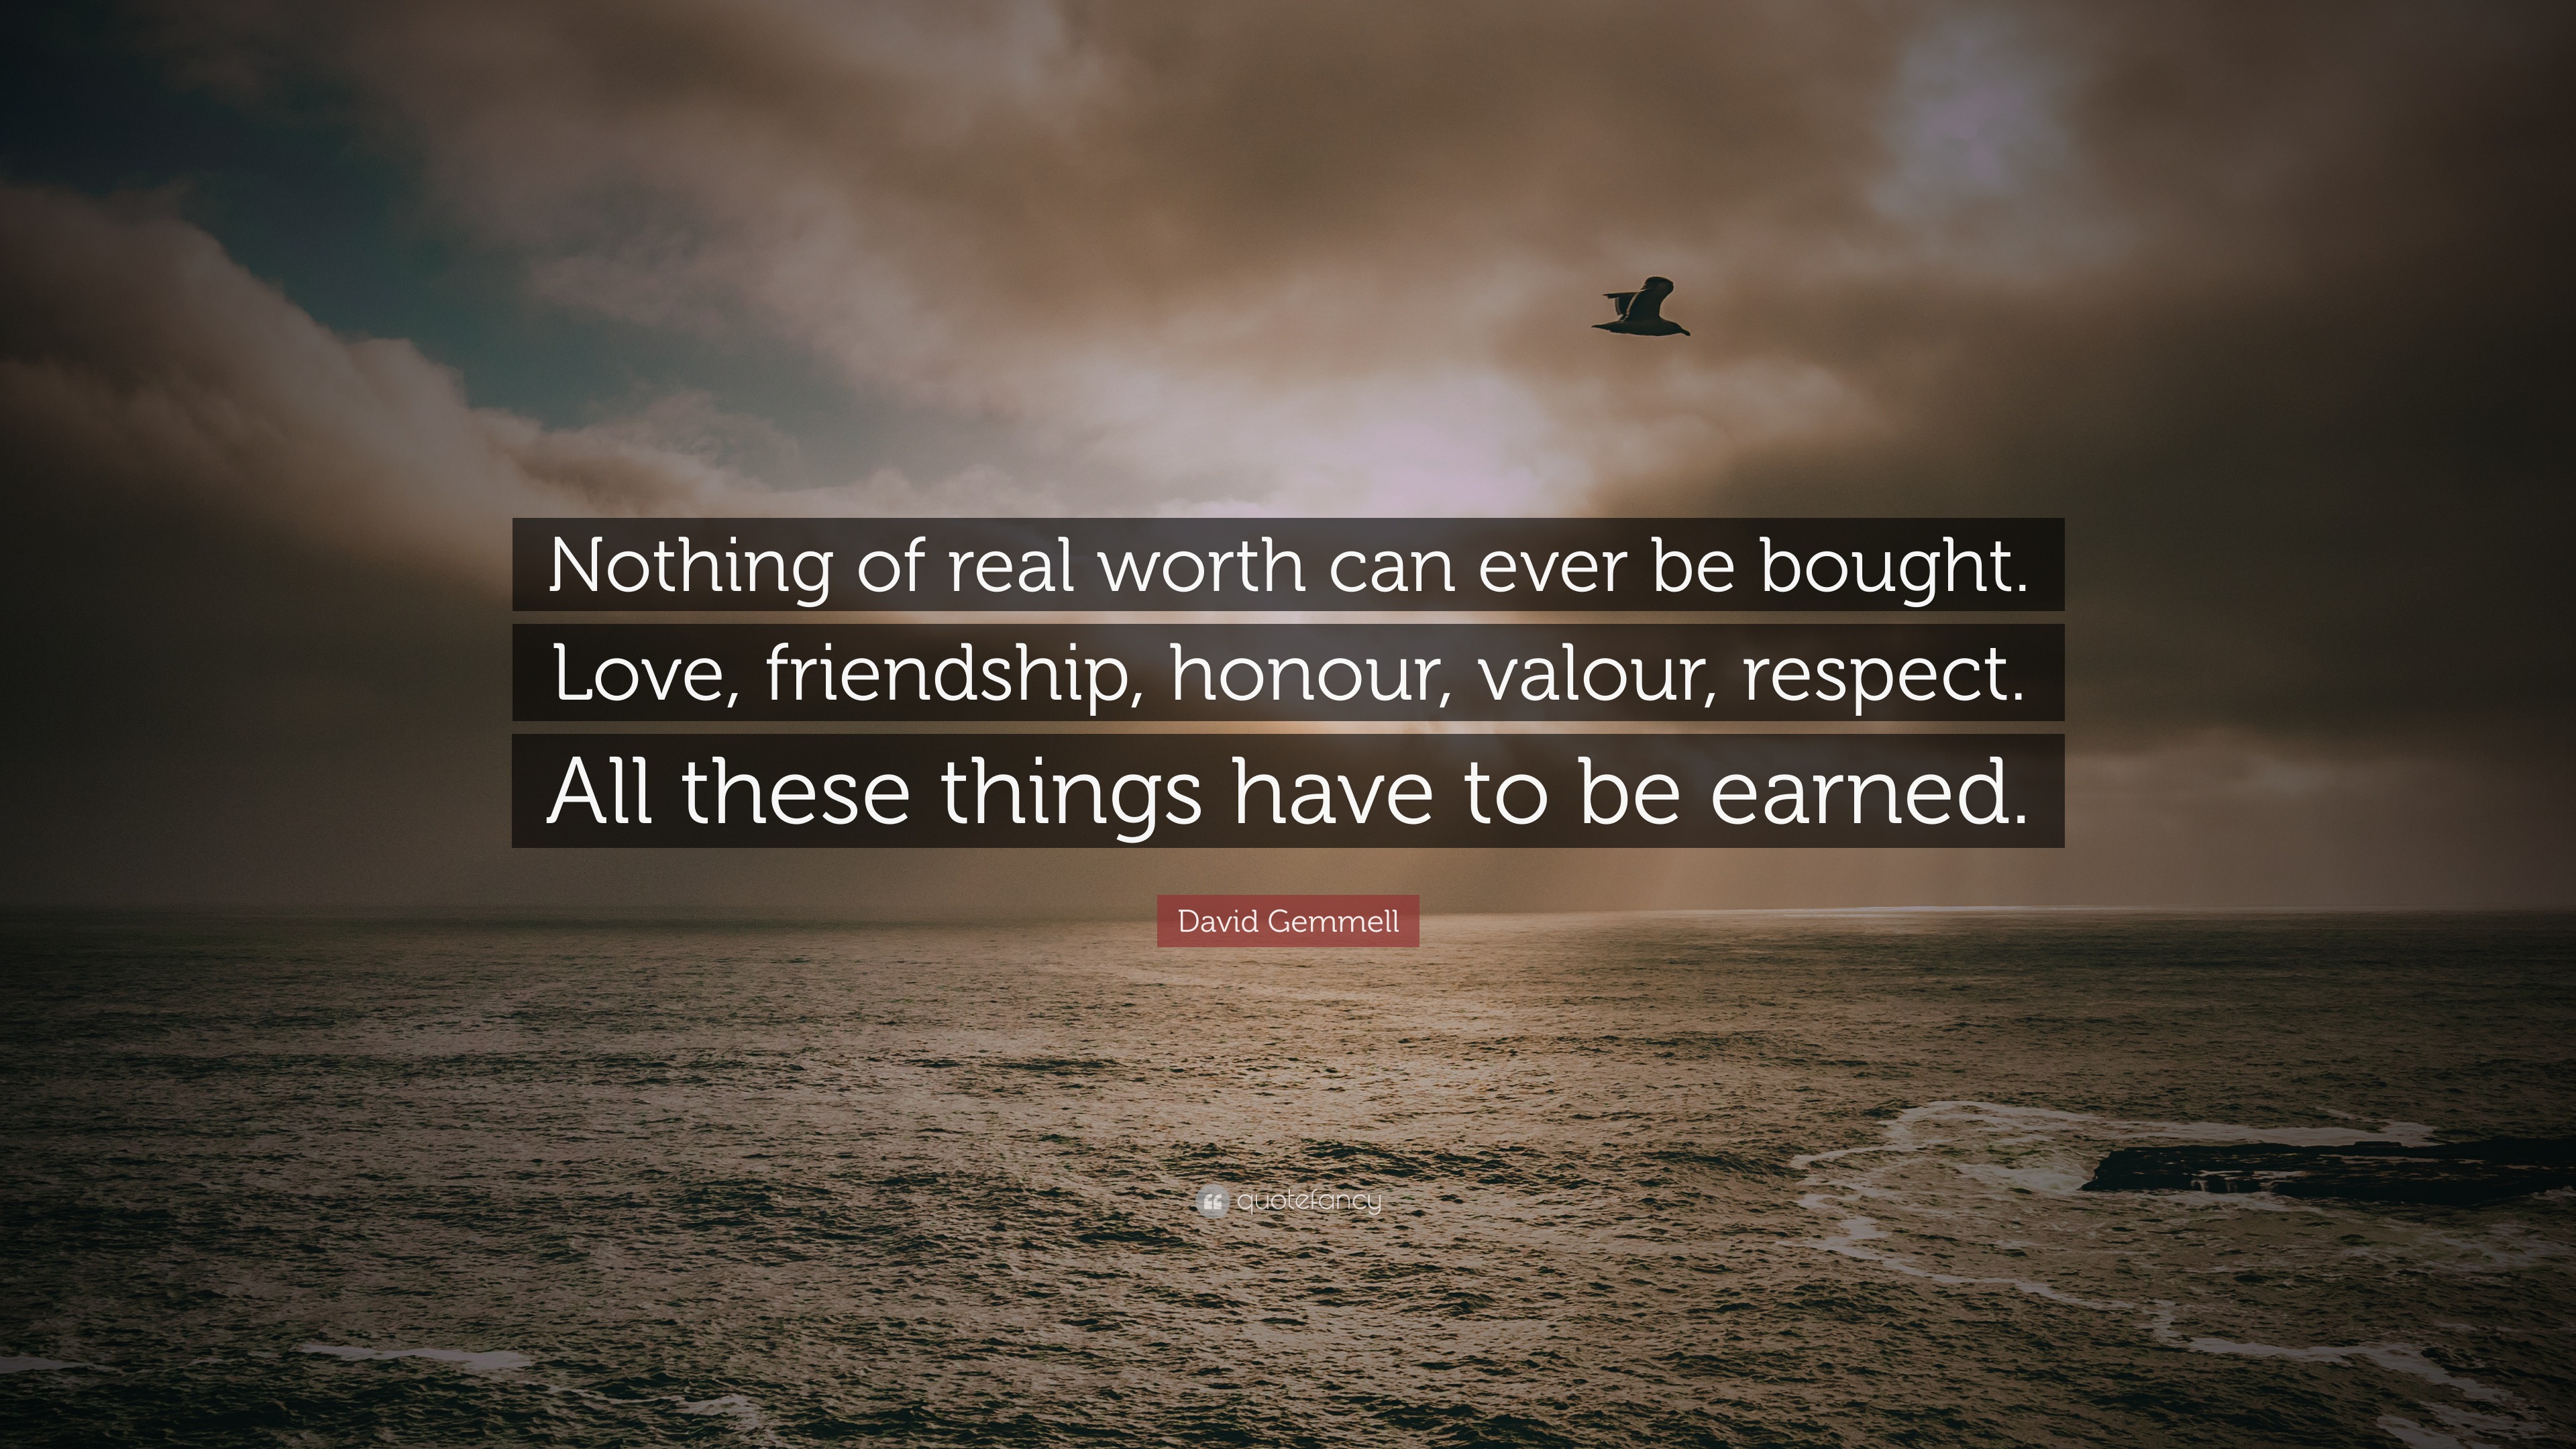 David Gemmell Quote “Nothing of real worth can ever be bought Love